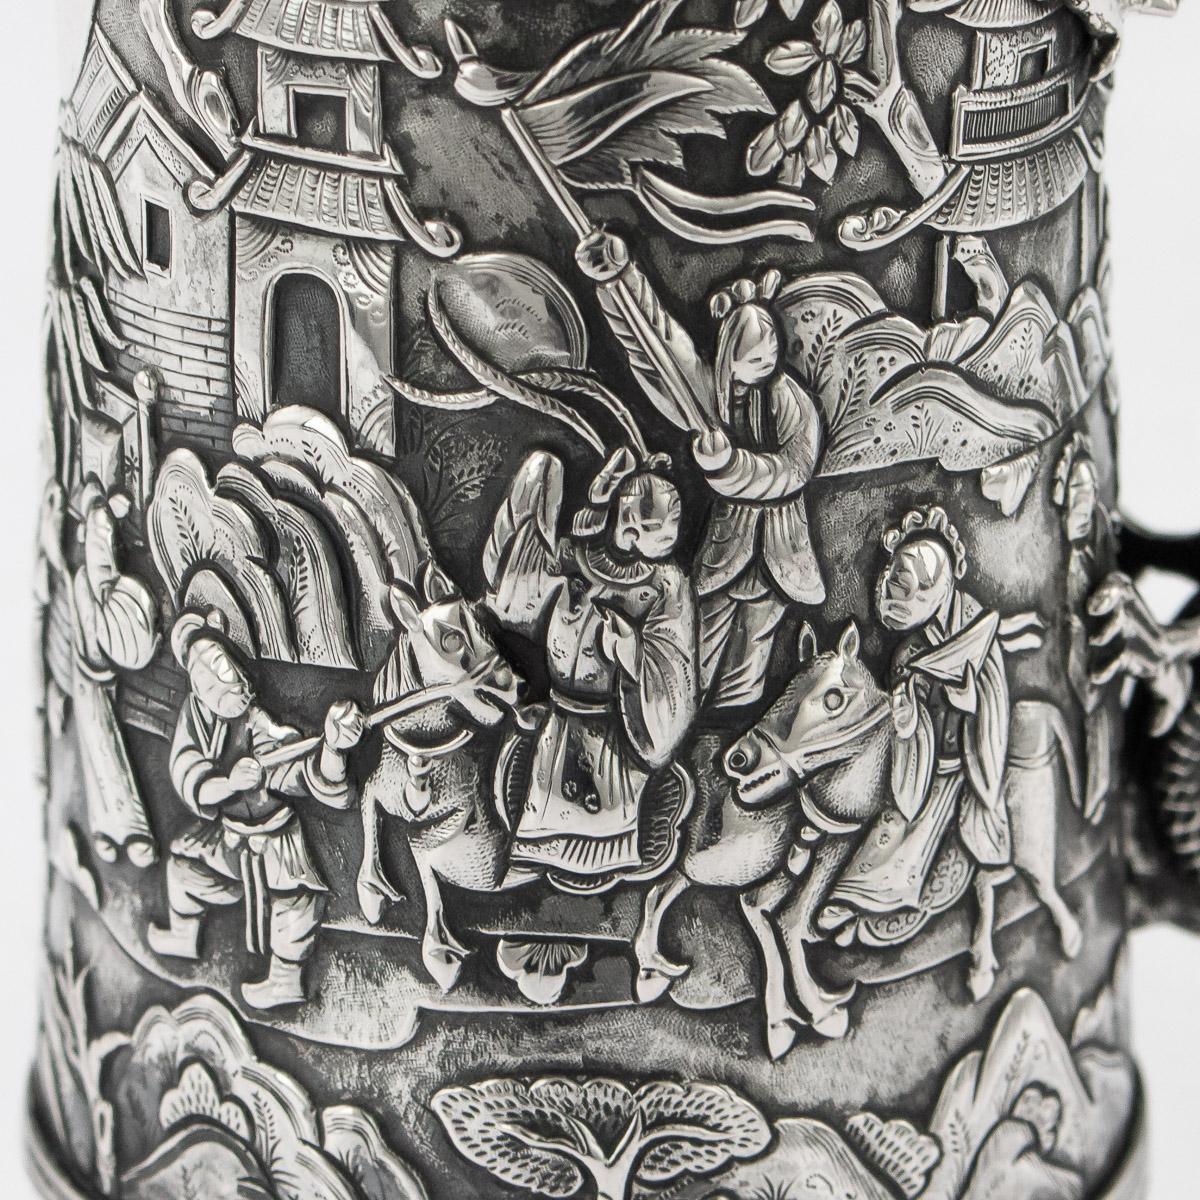 19thC Chinese Export Solid Silver Nobility Scenes Mug, Cutshing, c.1870 5